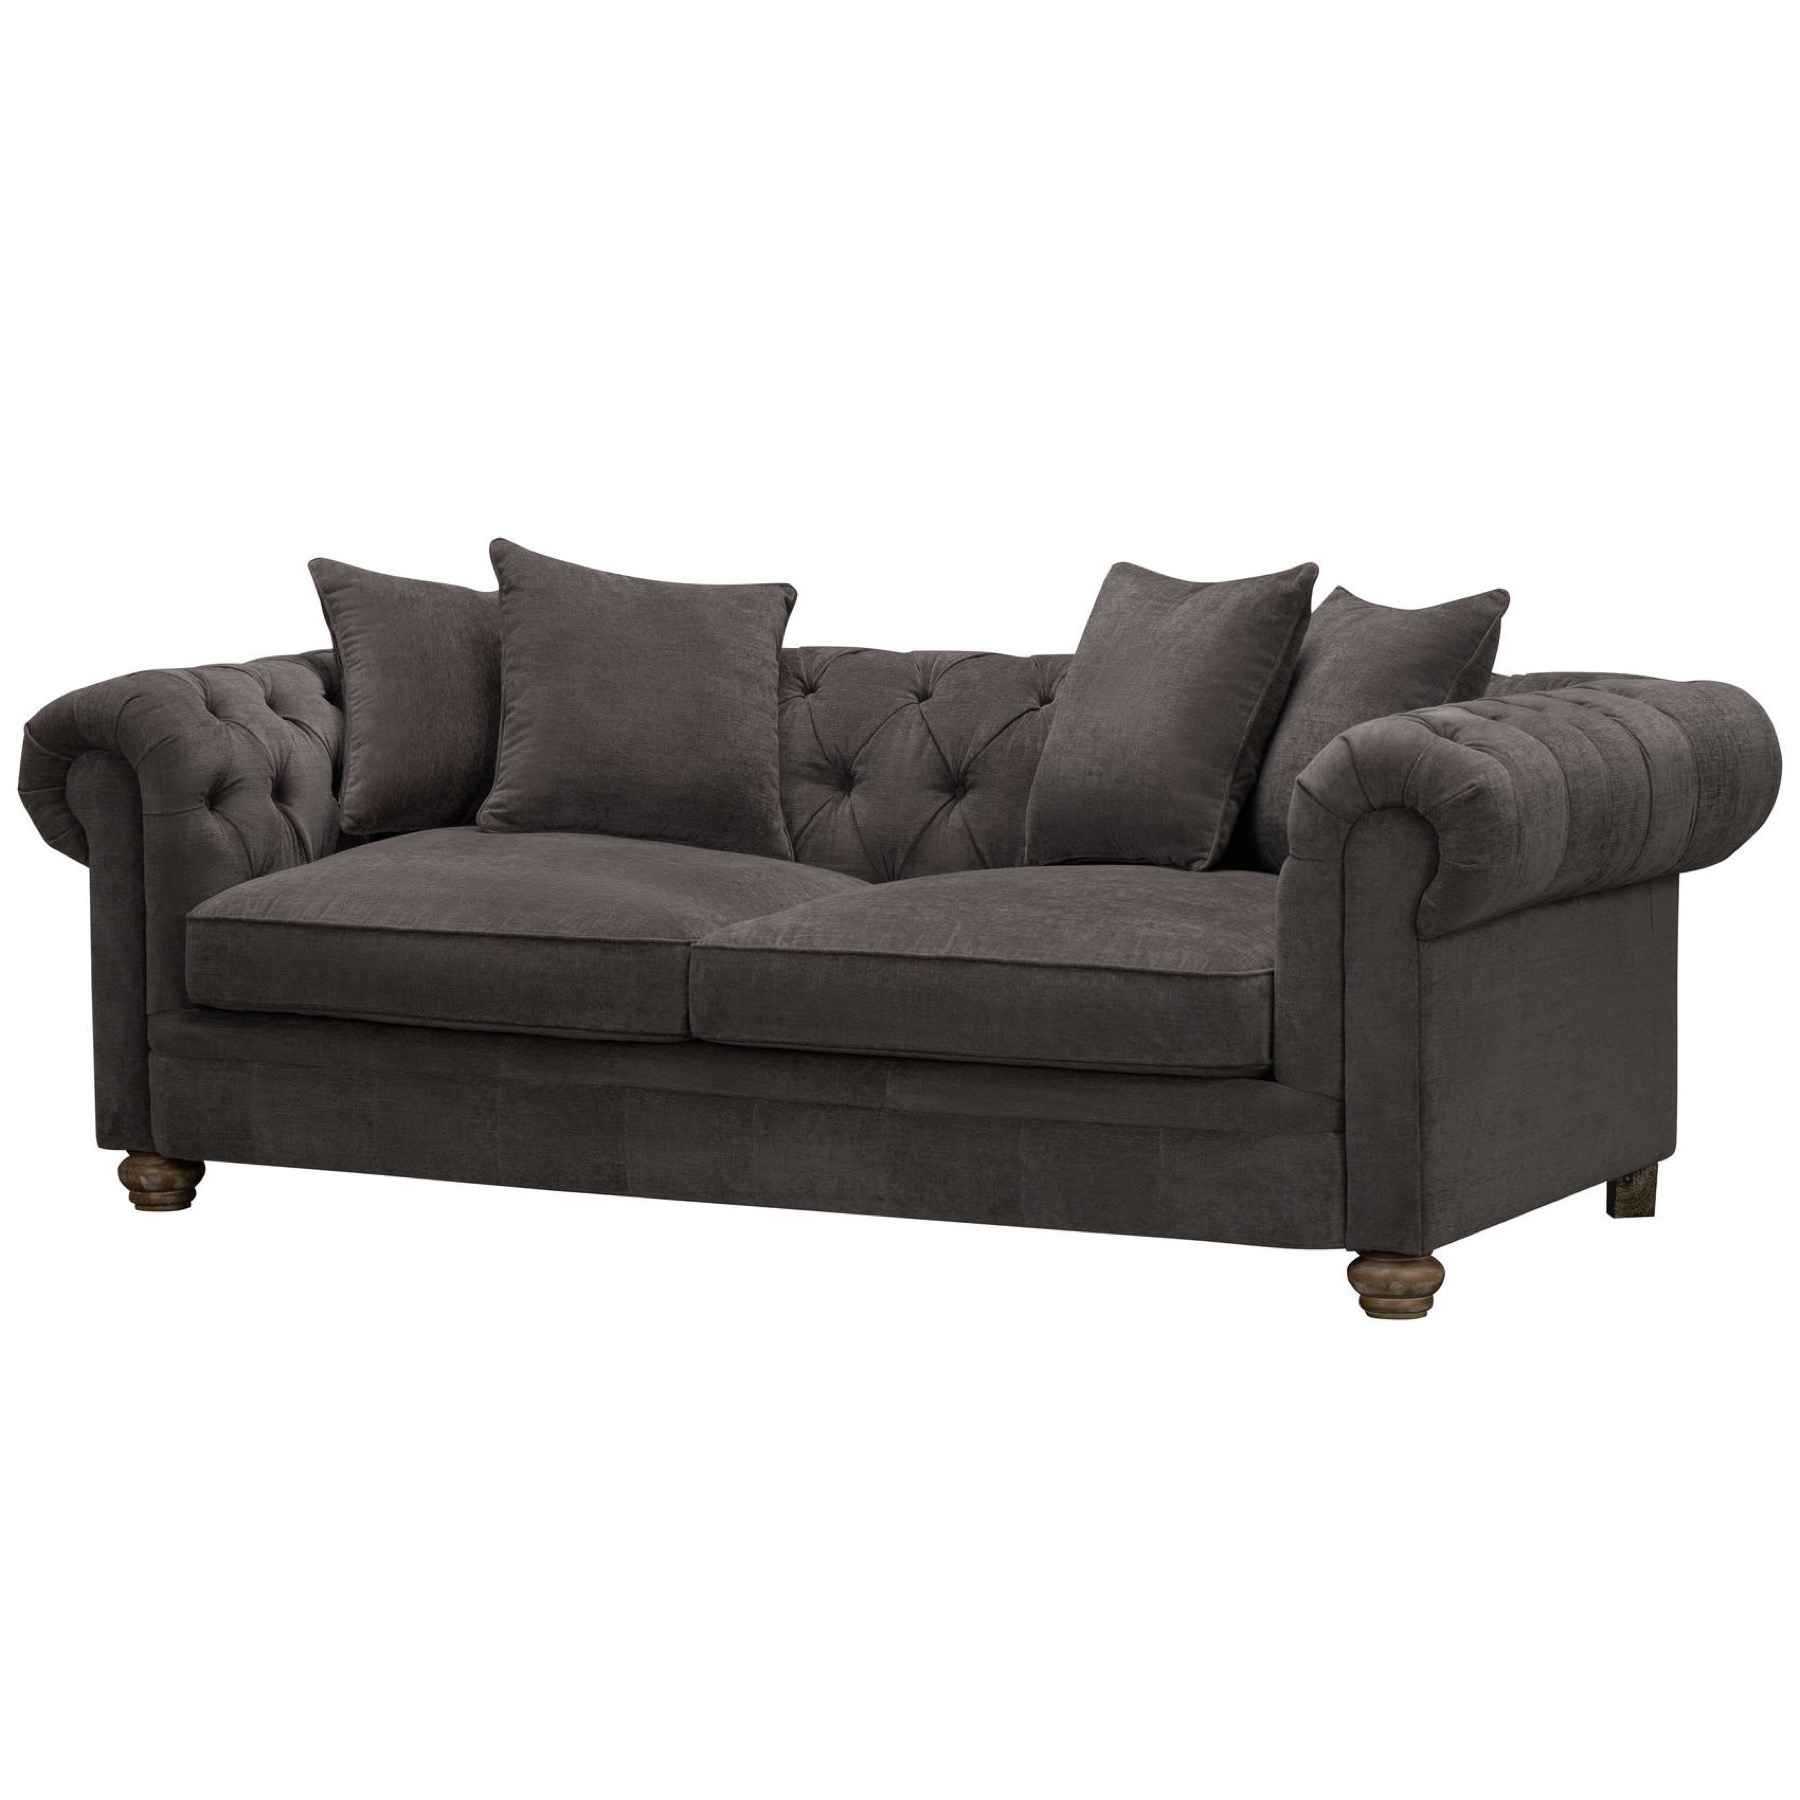 Windsor Chesterfield Three Seater Sofa - Image 1